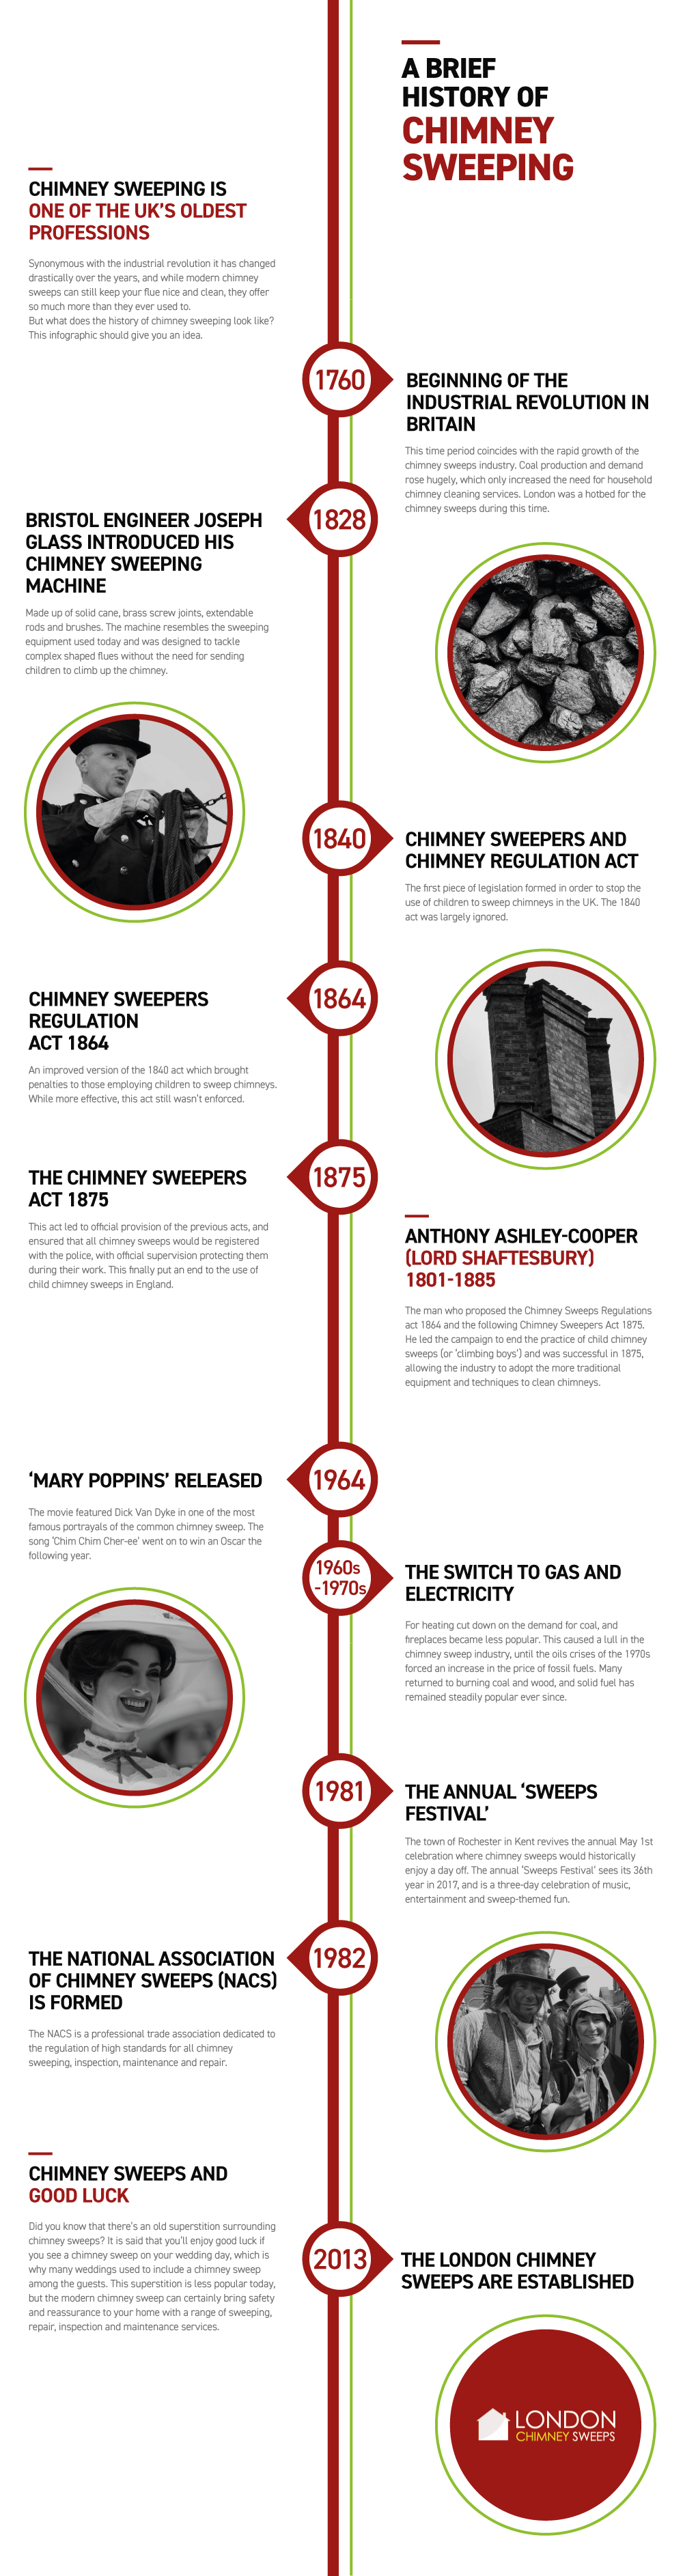 History Of Chimney Sweeping